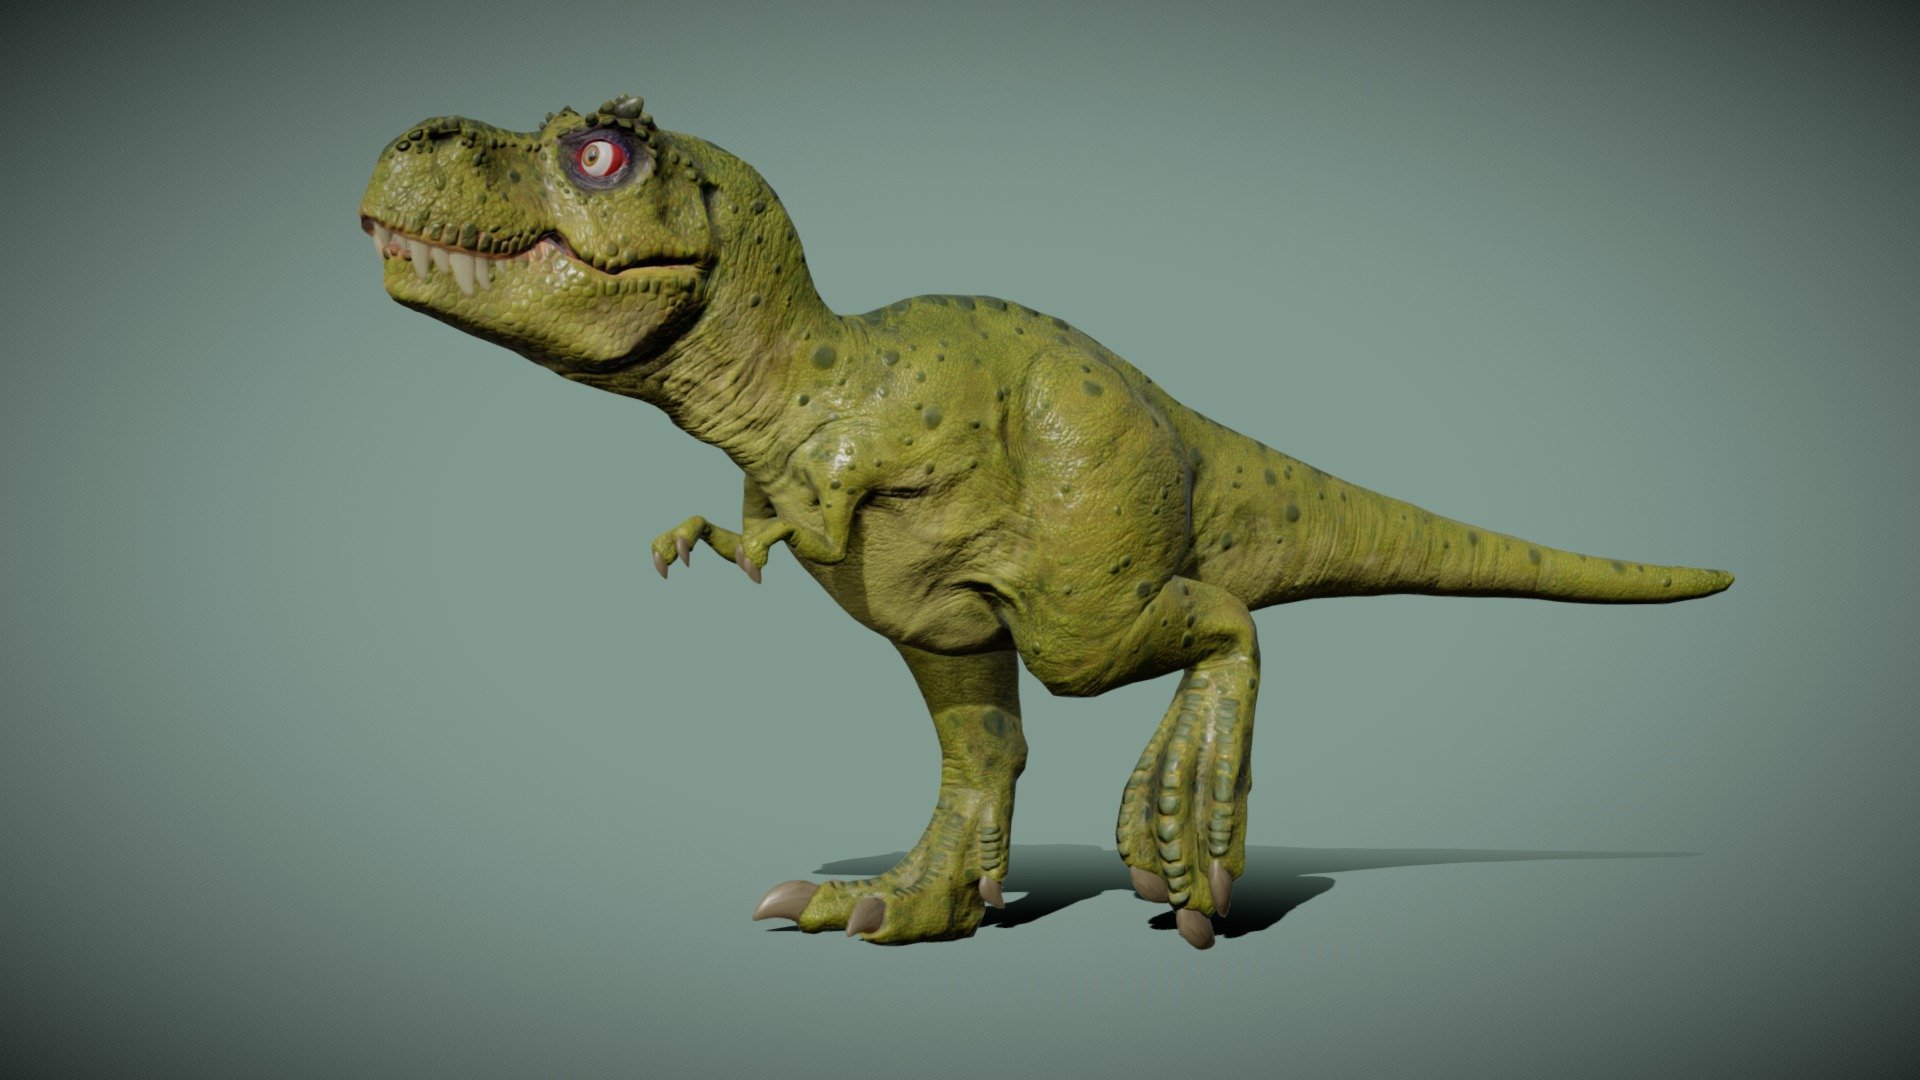 Tyrannosaurus cartoon version, createde in Zbrush core, Blender and Substance Painter

Original blender file in the Zip folder uploaded!

Textures 4096x4096:* - body: albedo, roughness, Ambient occlusion, normal - claws, eyes and teeth: albedo, roughness, Ambient occlusion, normal, opacity - Trex (Cartoon version) 3.2 - Buy Royalty Free 3D model by creatureFab (@3dCoast) 3d model